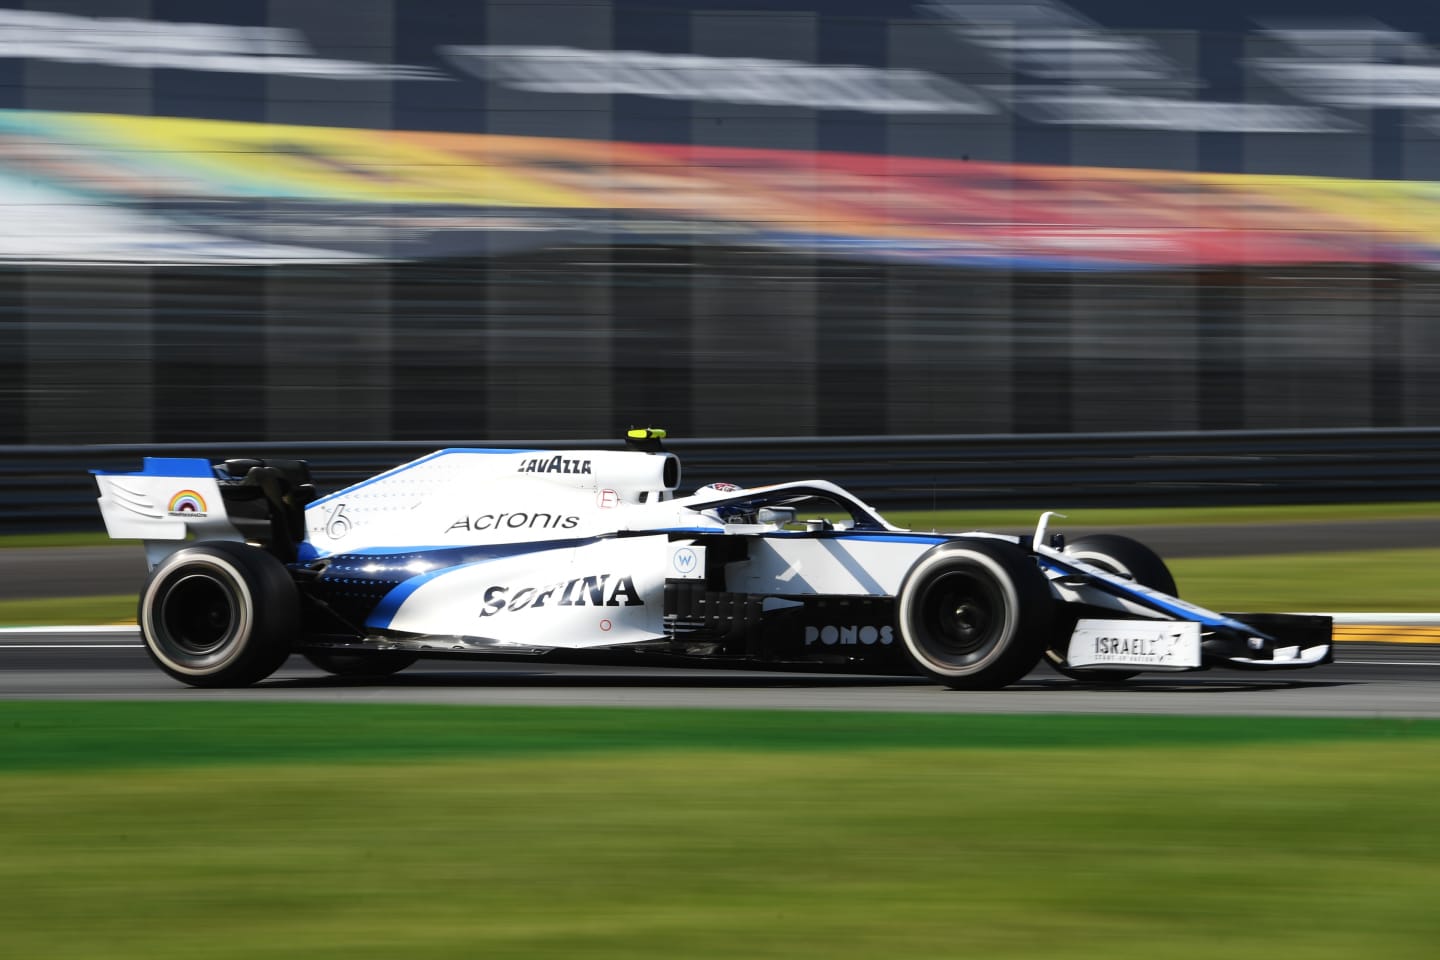 MONZA, ITALY - SEPTEMBER 06: Nicholas Latifi of Canada driving the (6) Williams Racing FW43 Mercedes on track during the F1 Grand Prix of Italy at Autodromo di Monza on September 06, 2020 in Monza, Italy. (Photo by Rudy Carezzevoli/Getty Images)